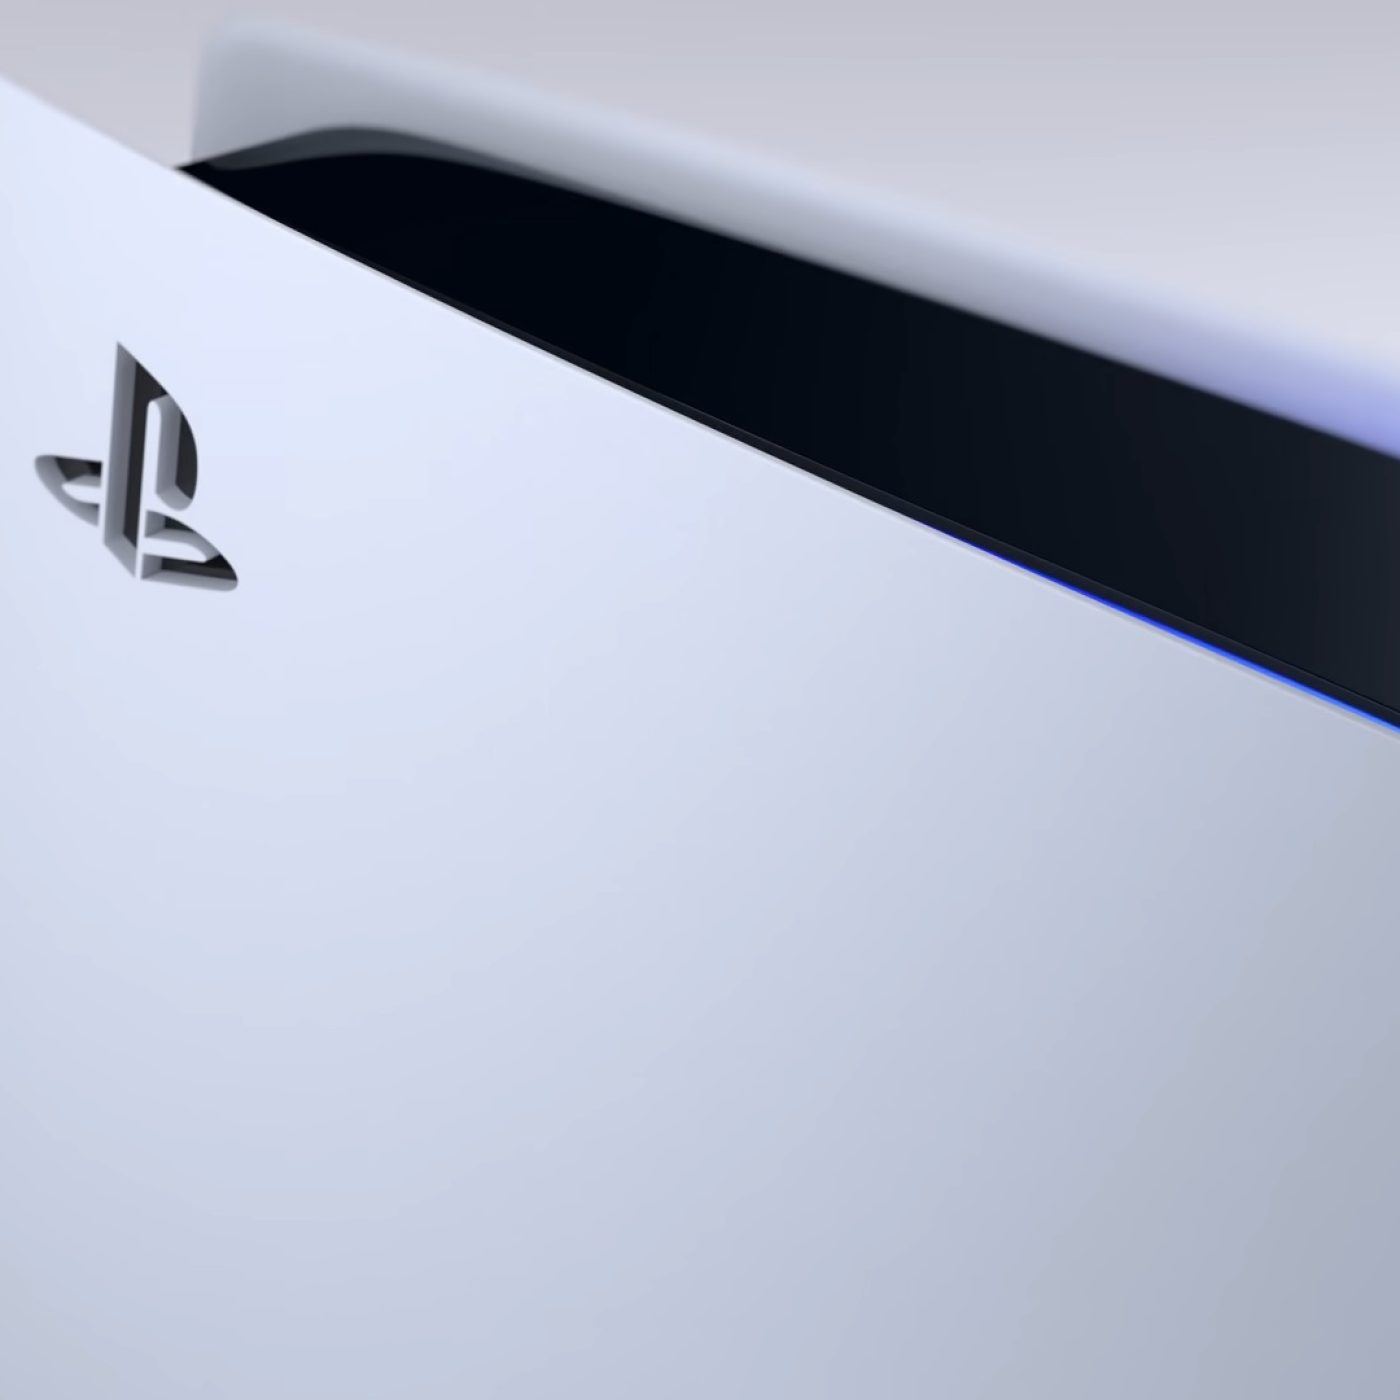 A PlayStation 5 Slim Model Will Release Later This Year for $399, According  to Court Documents